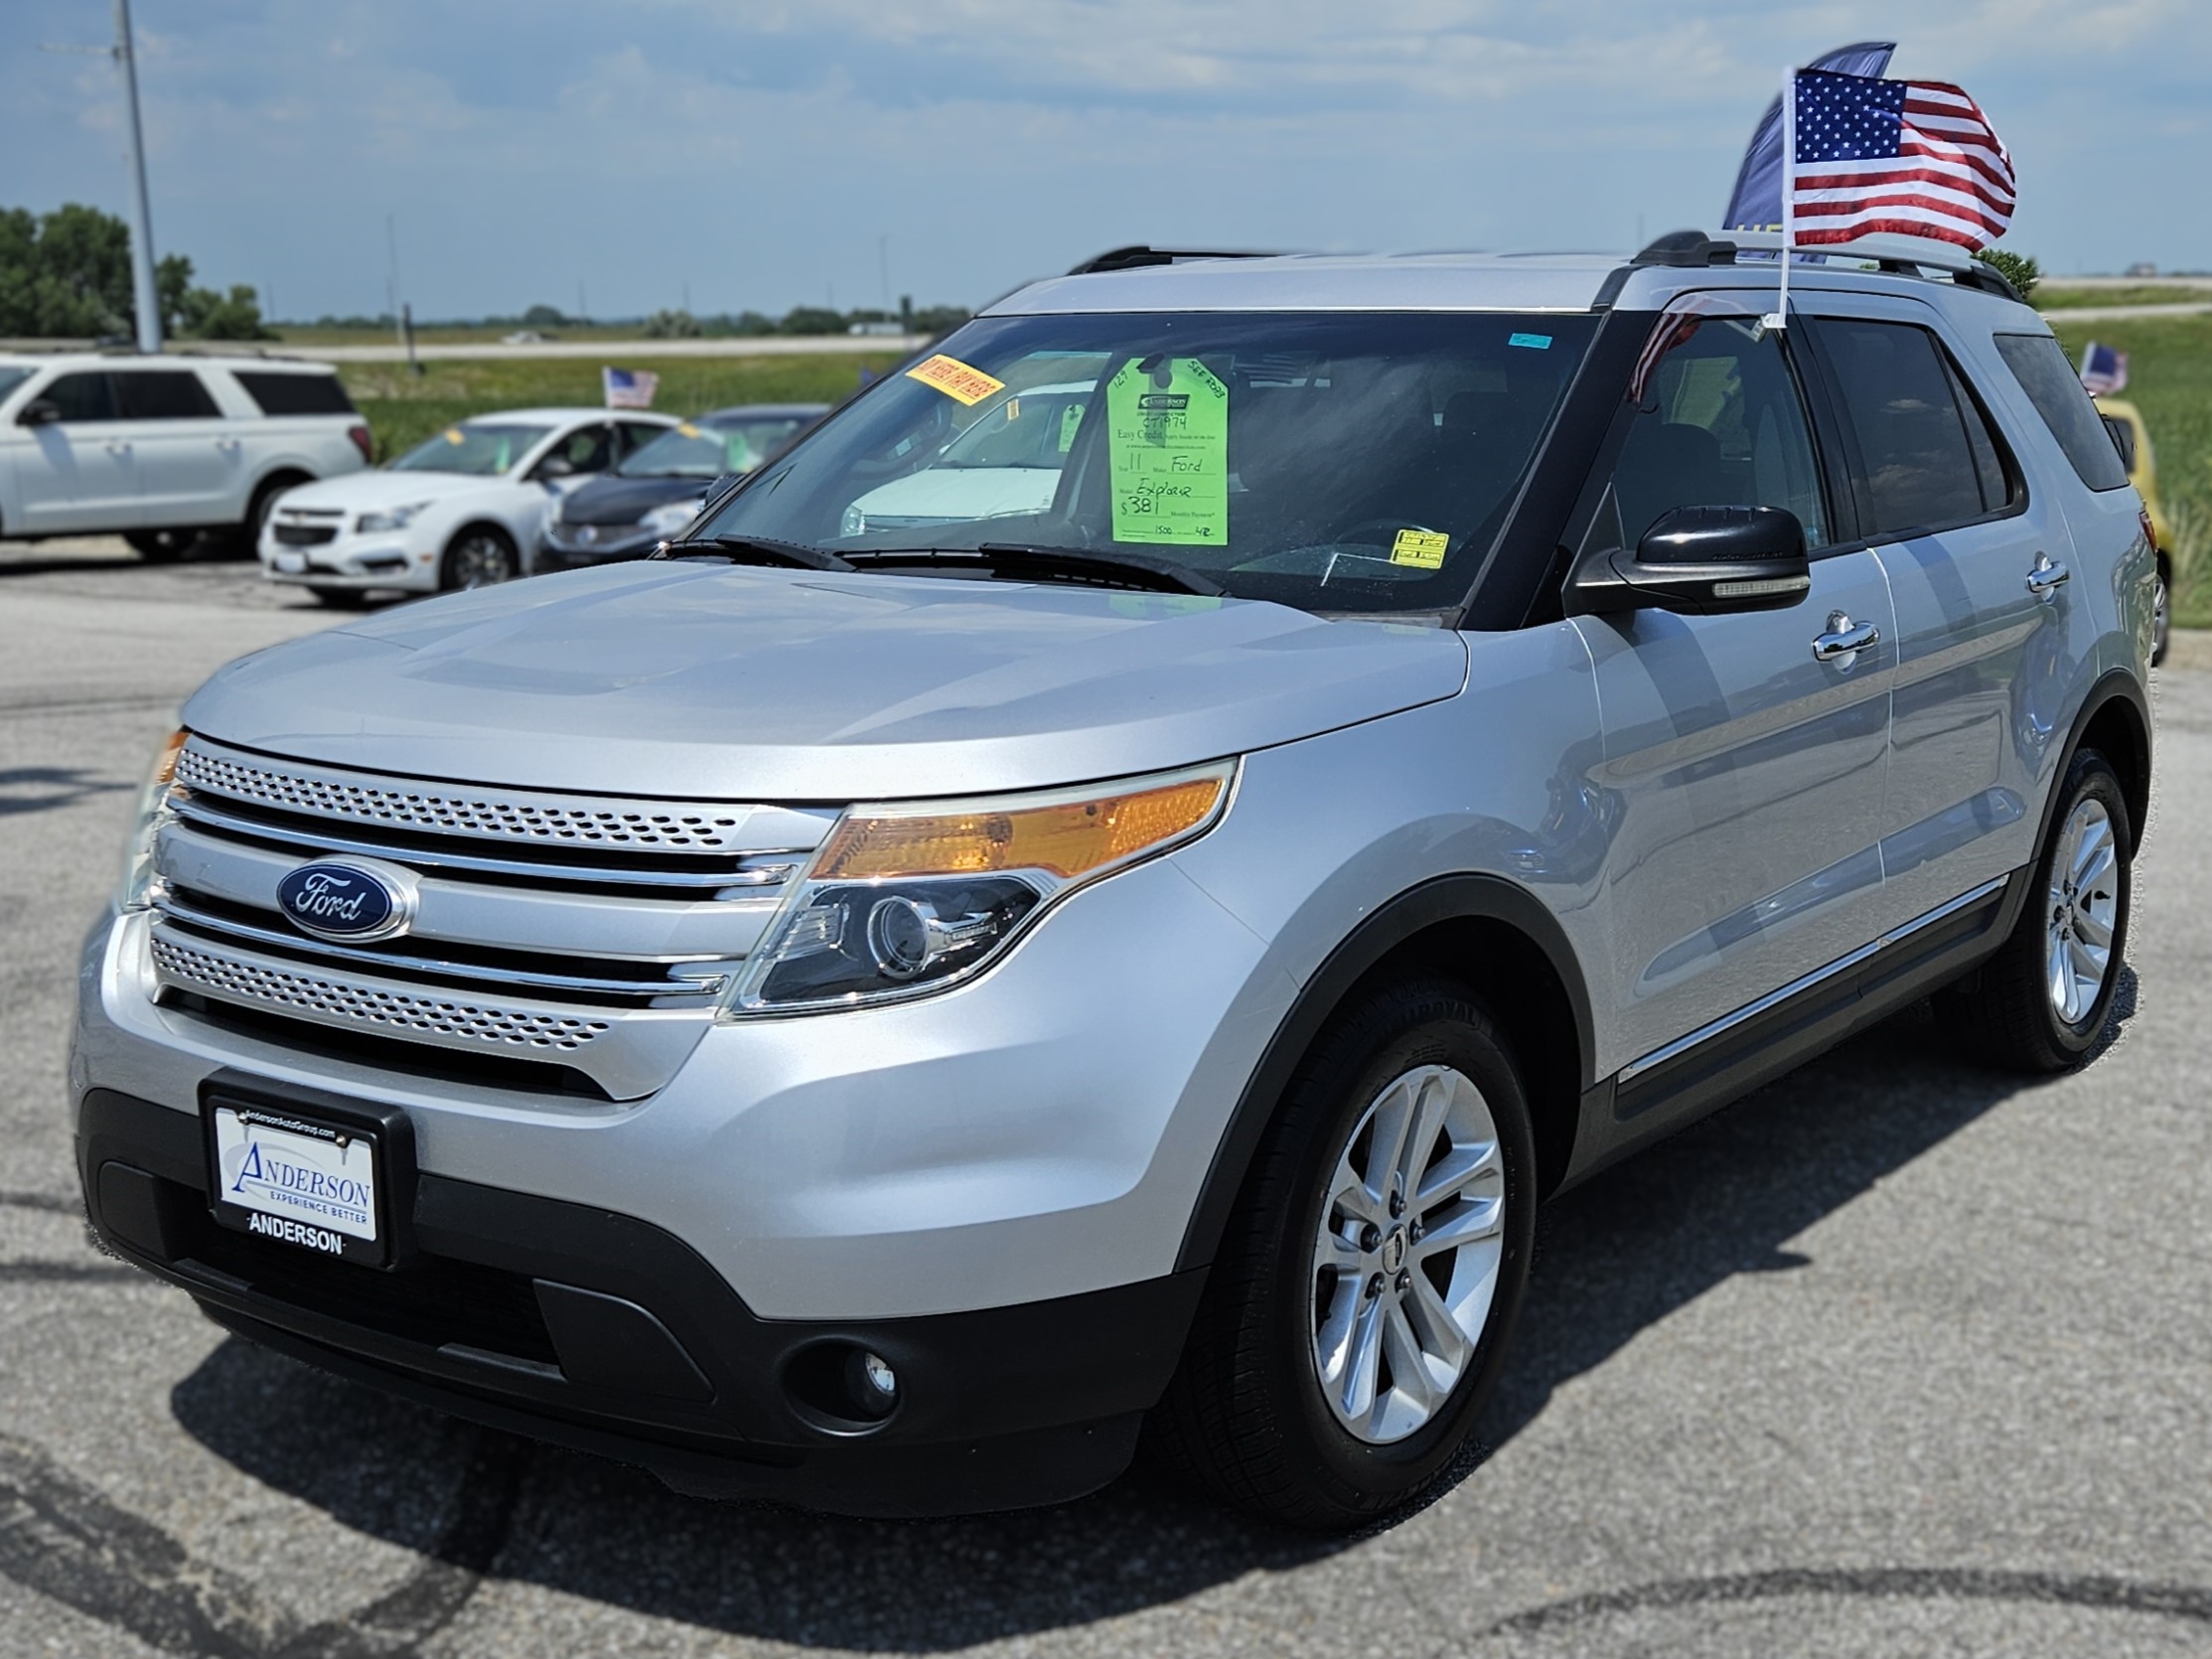 Used 2011 Ford Explorer XLT SUV for sale in 